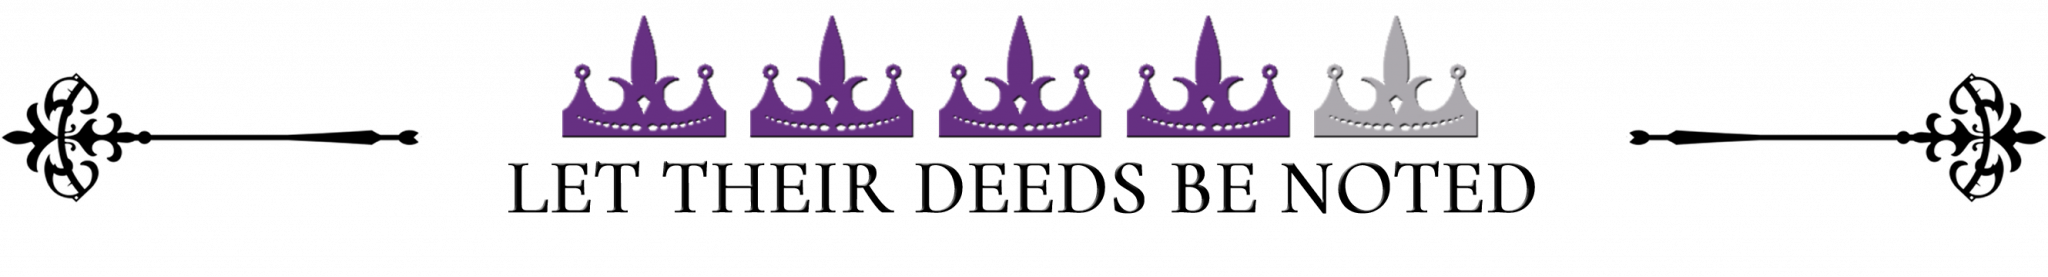 Let Their Deeds Be Noted - 4 Crowns